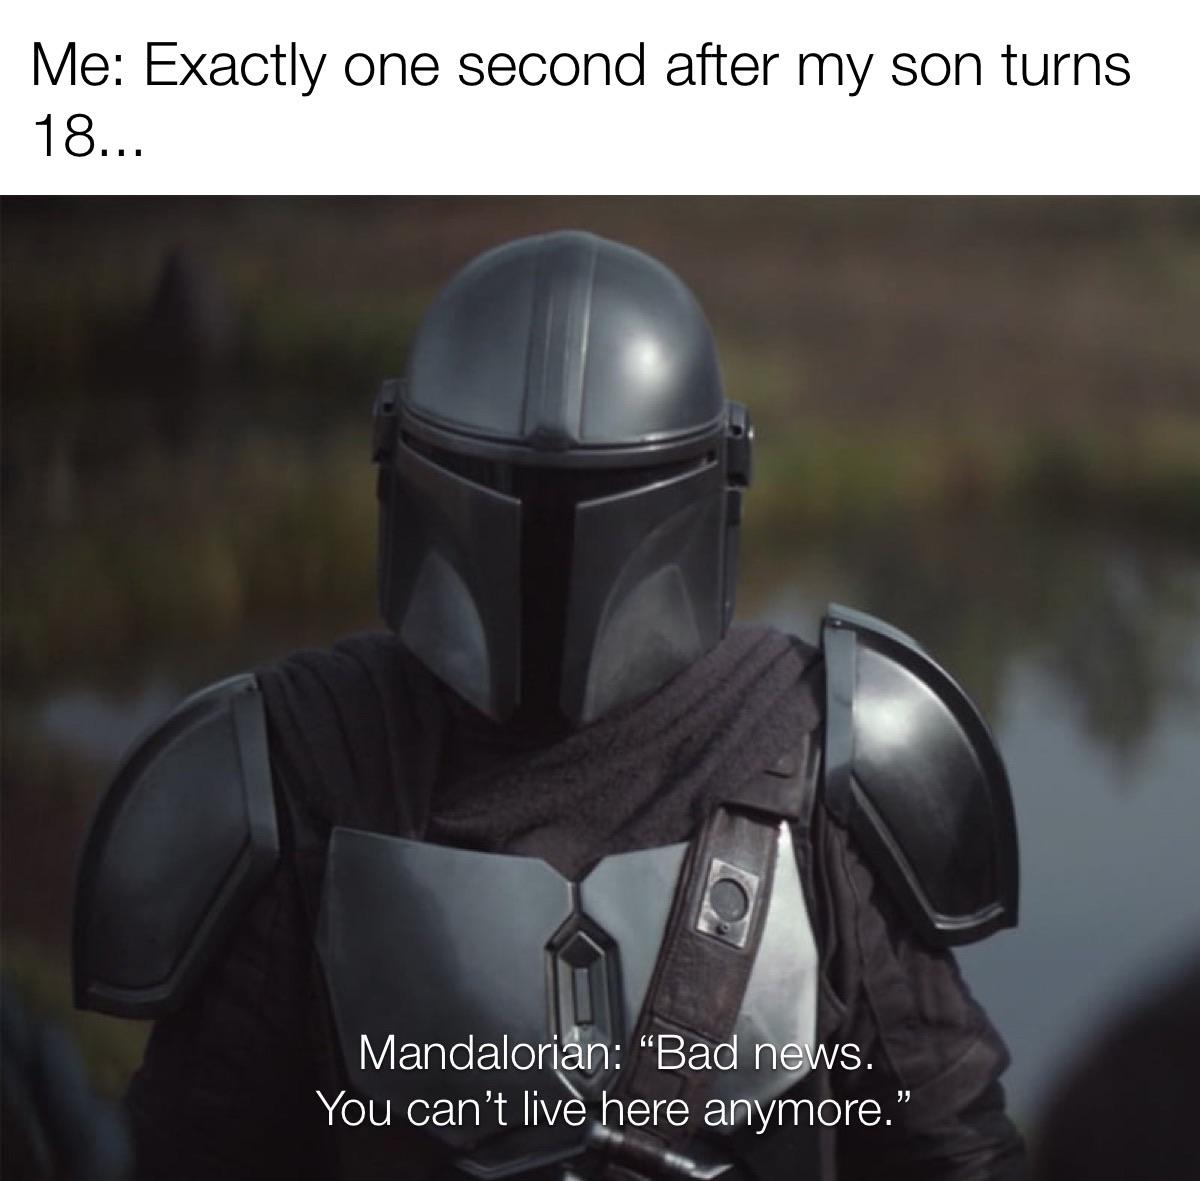 mandalorian episode 4 - Me Exactly one second after my son turns 18... Mandalorian Bad news. You can't live here anymore.